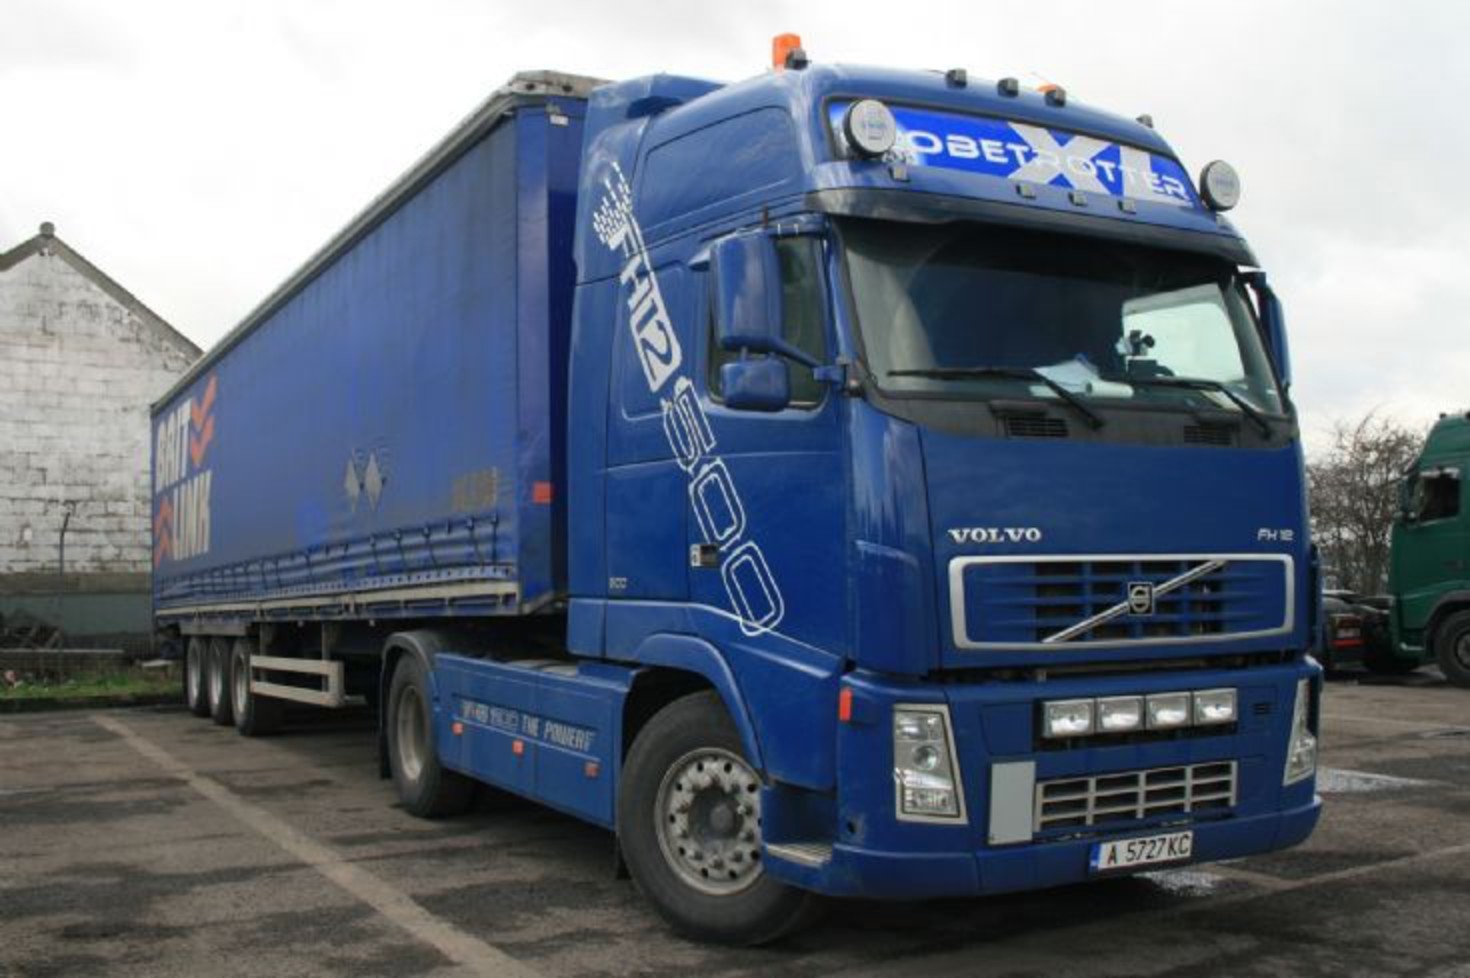 Saw this Volvo FH12 500, on Bulgarian plates, in Immingham,N.E.Lincs.